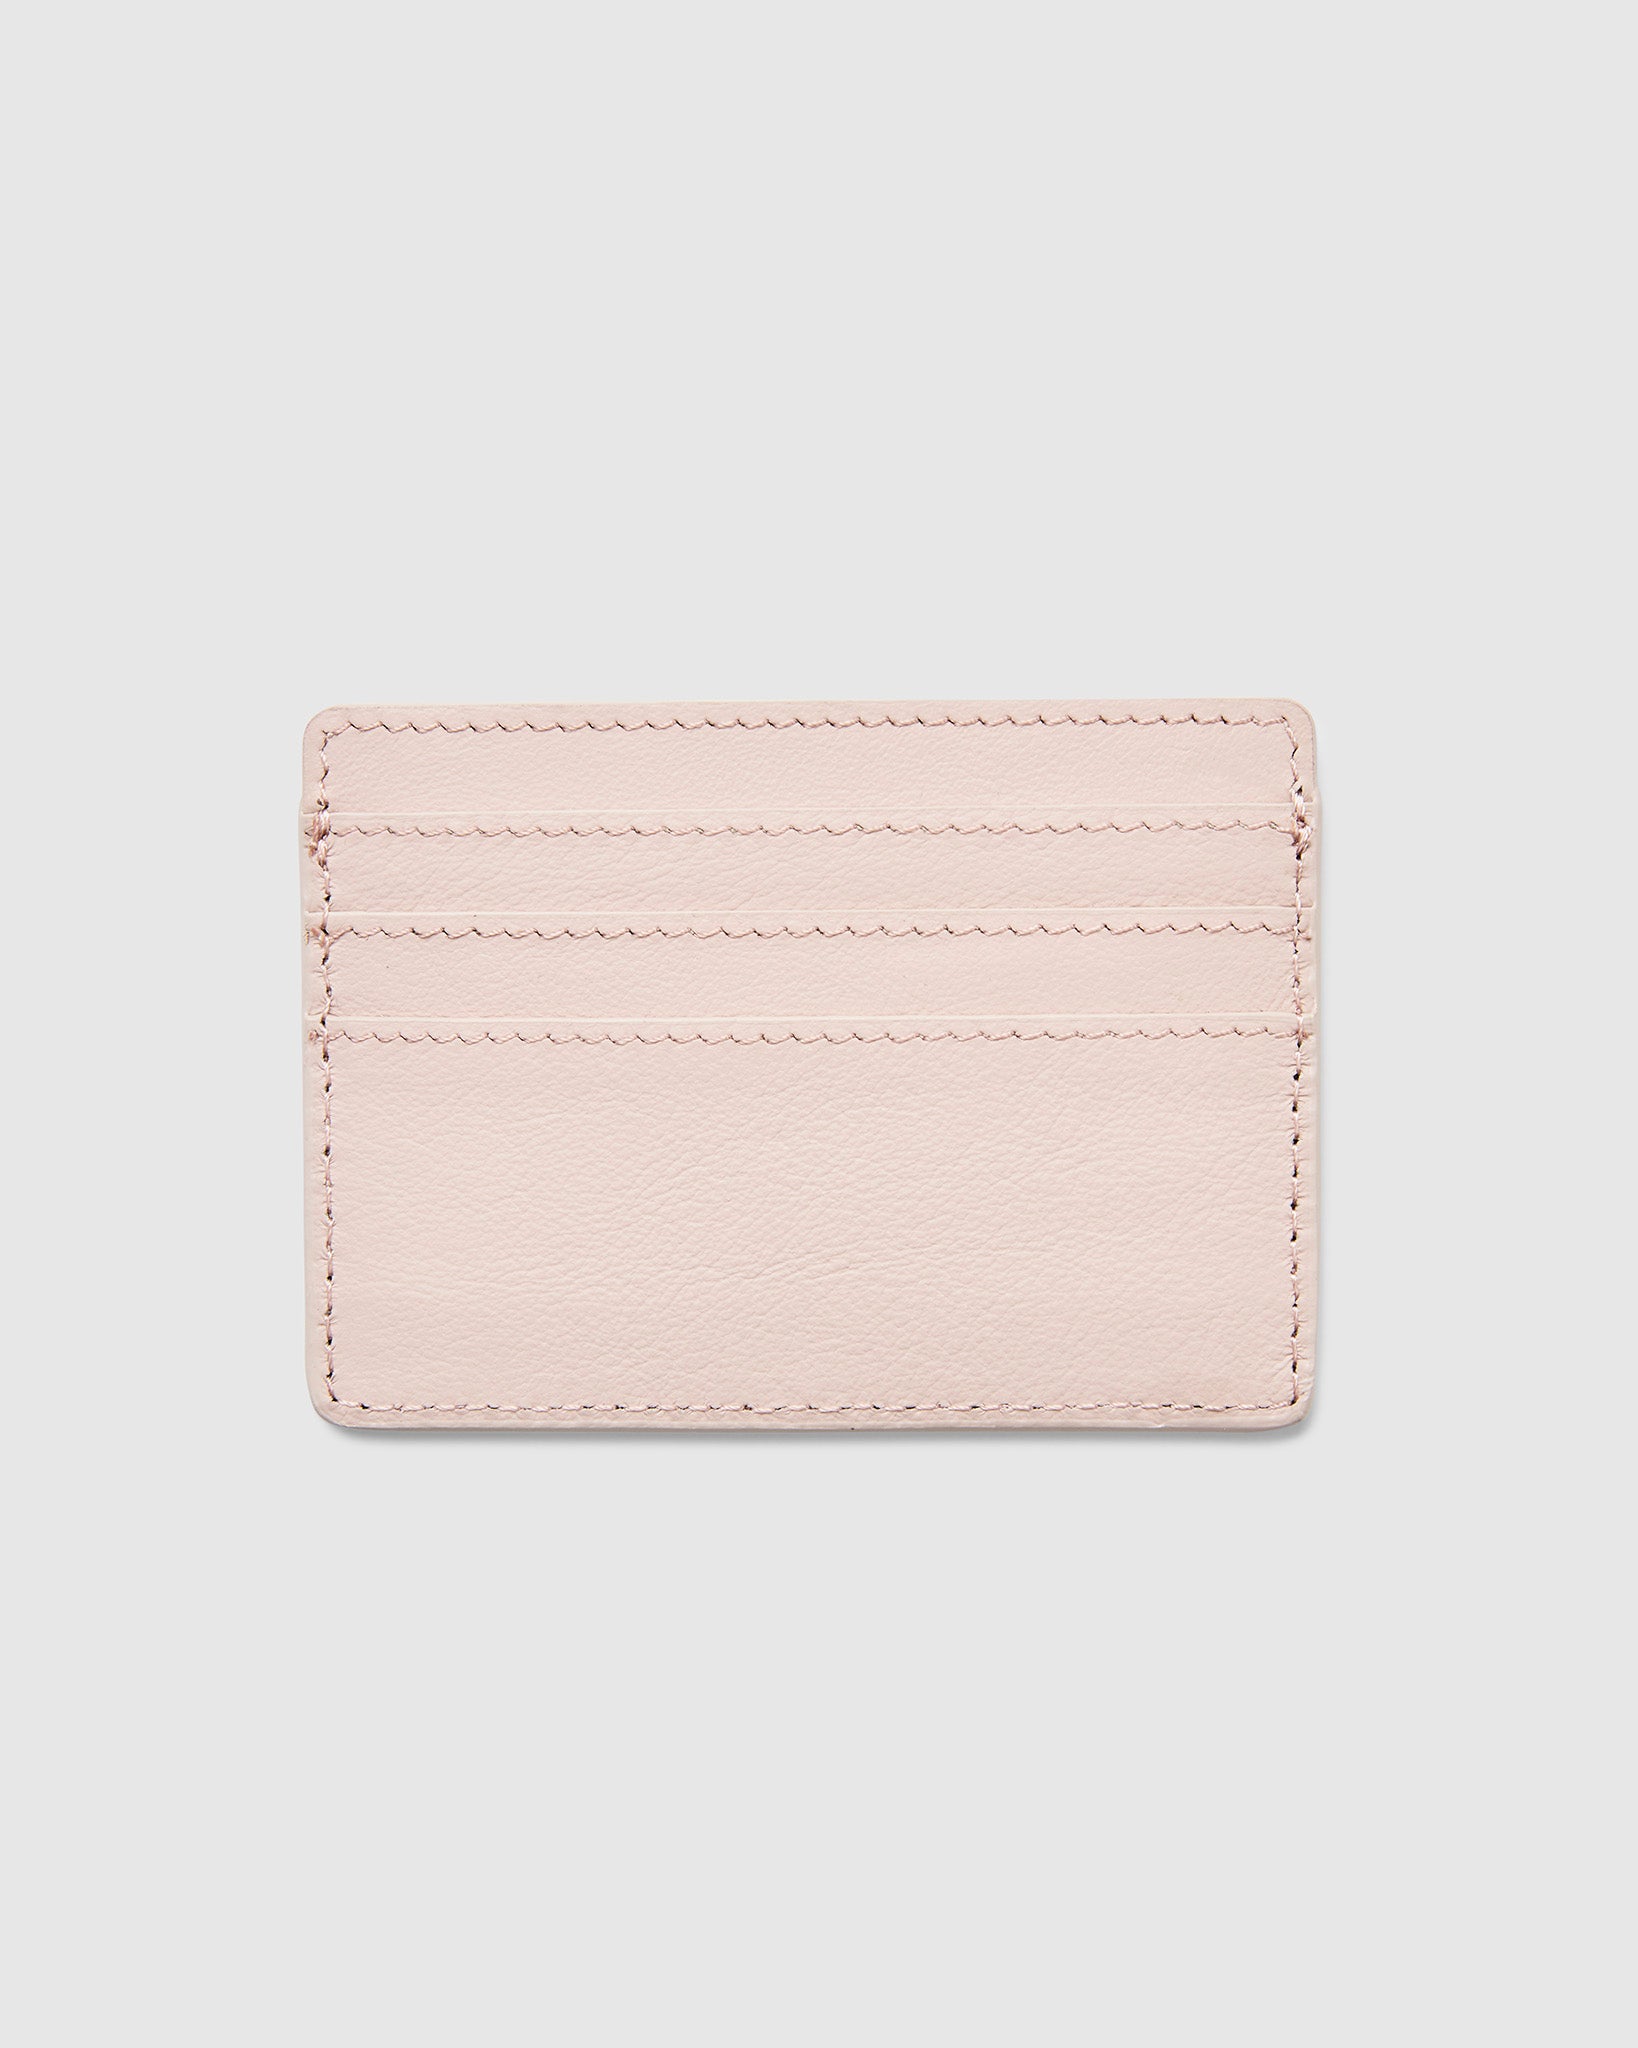 Leather Card Holder in Chic Rose